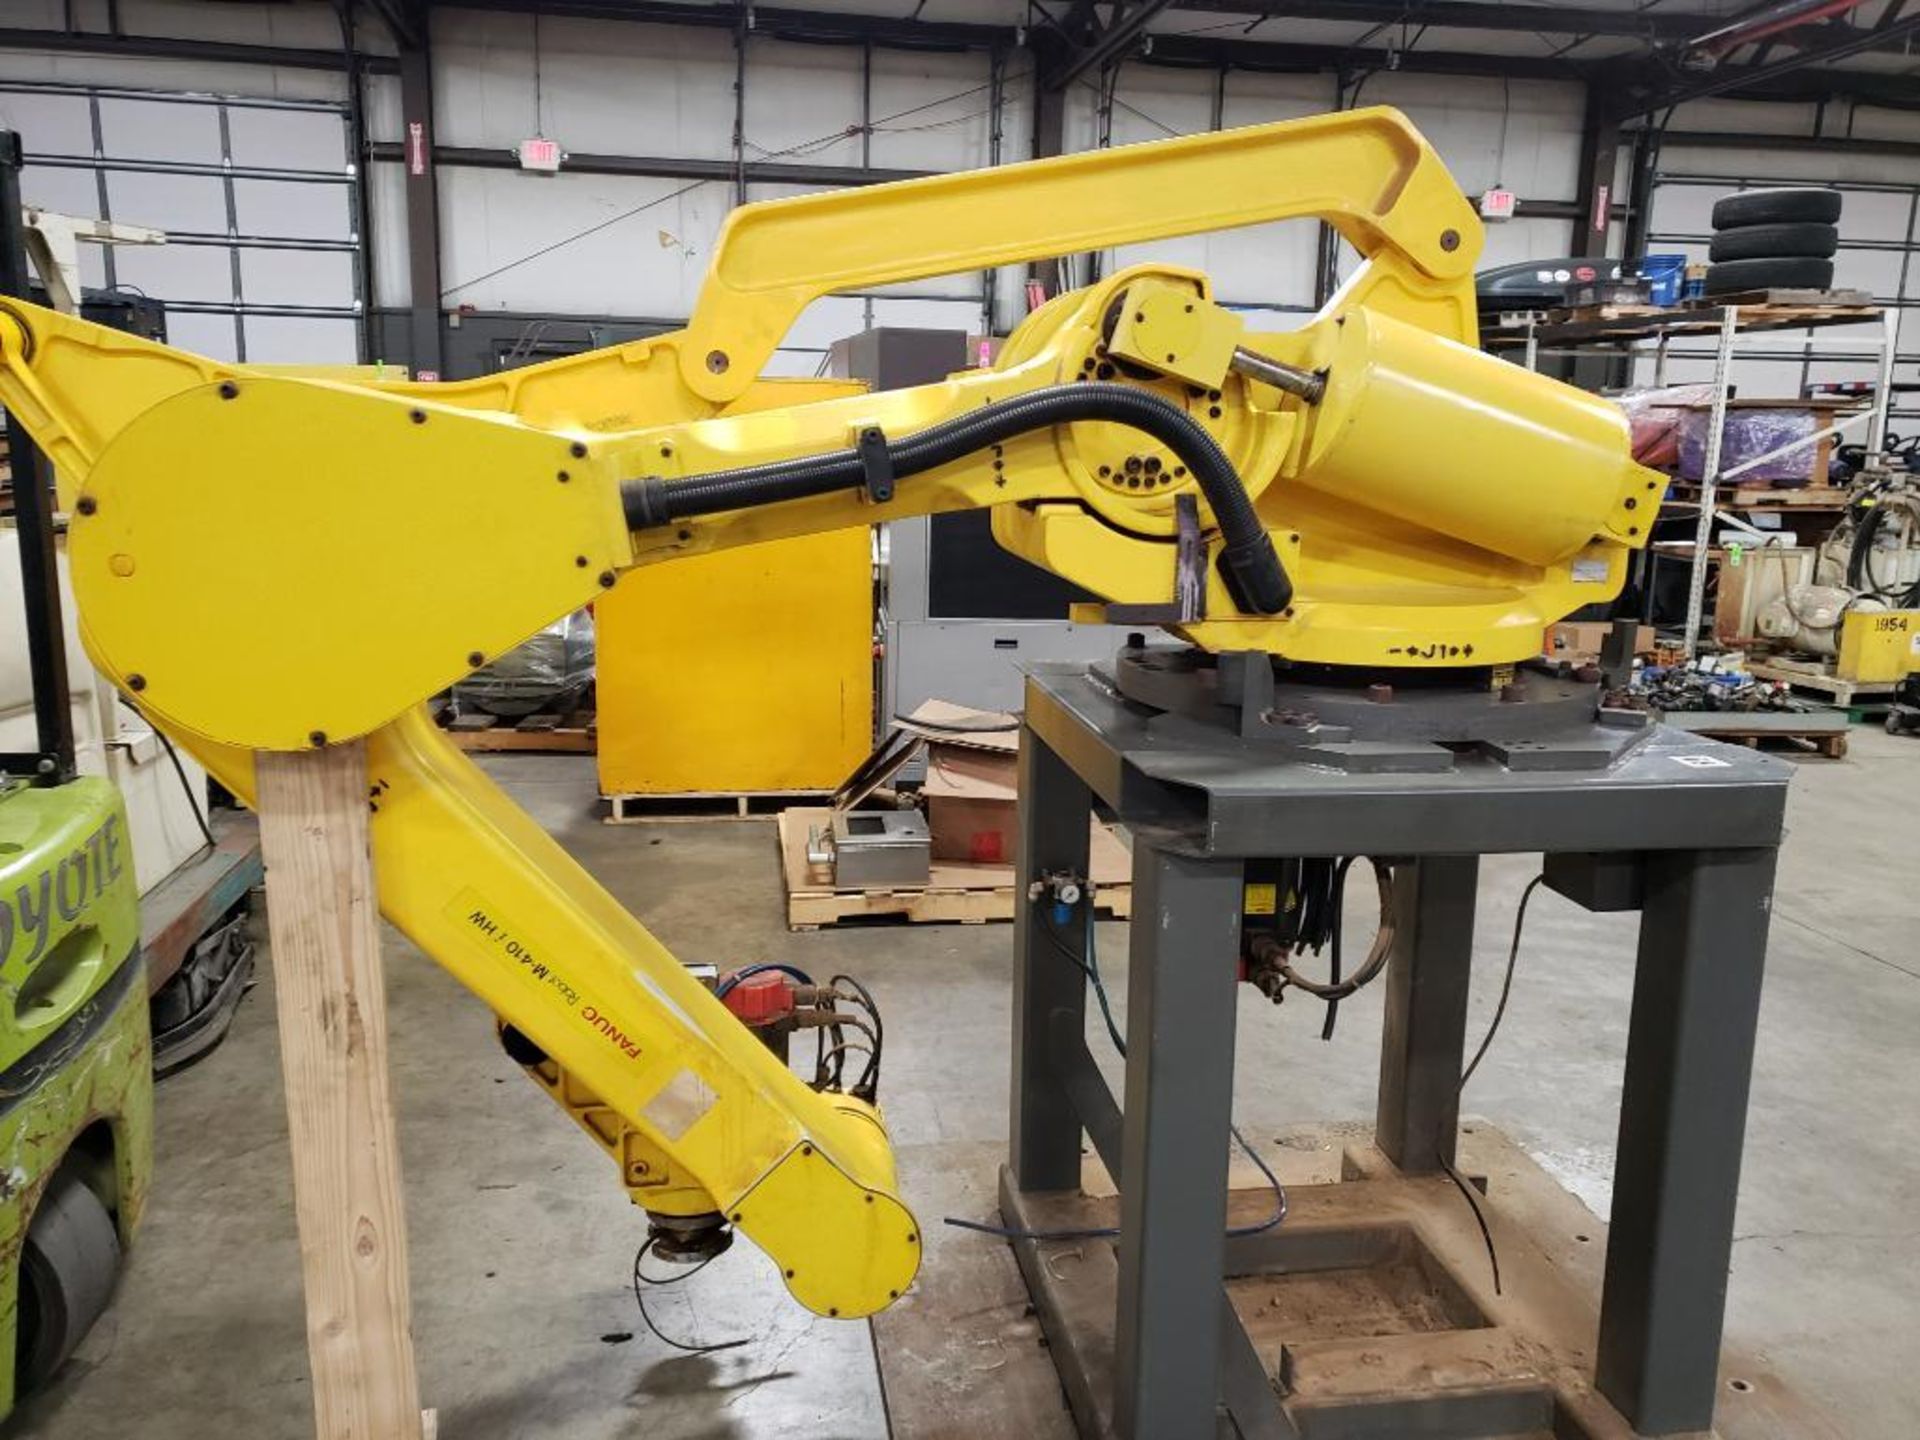 Fanuc M-410i HW robot arm. Does not include controller or cables. (cables have been cut)